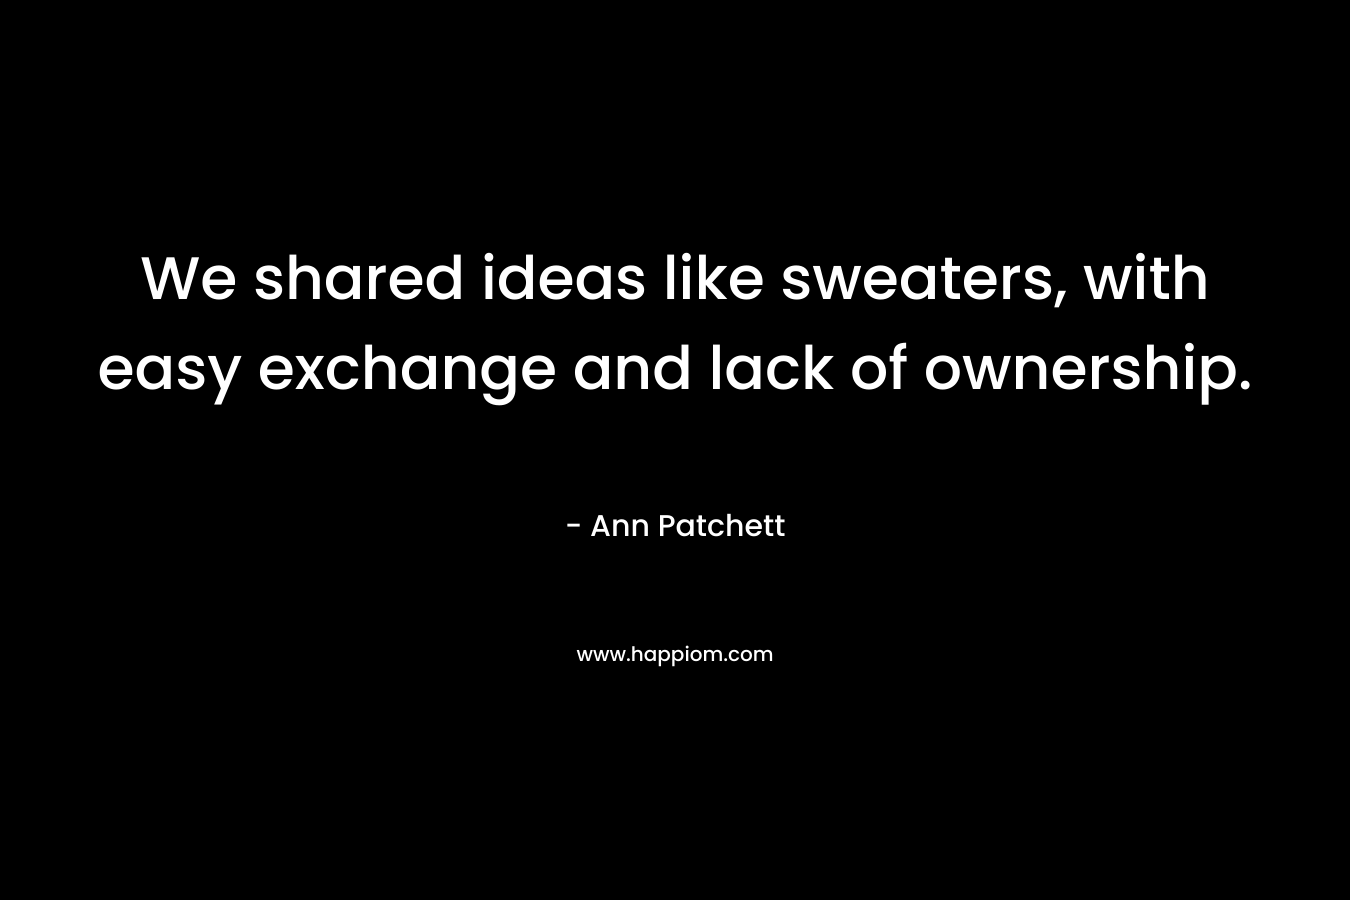 We shared ideas like sweaters, with easy exchange and lack of ownership. – Ann Patchett